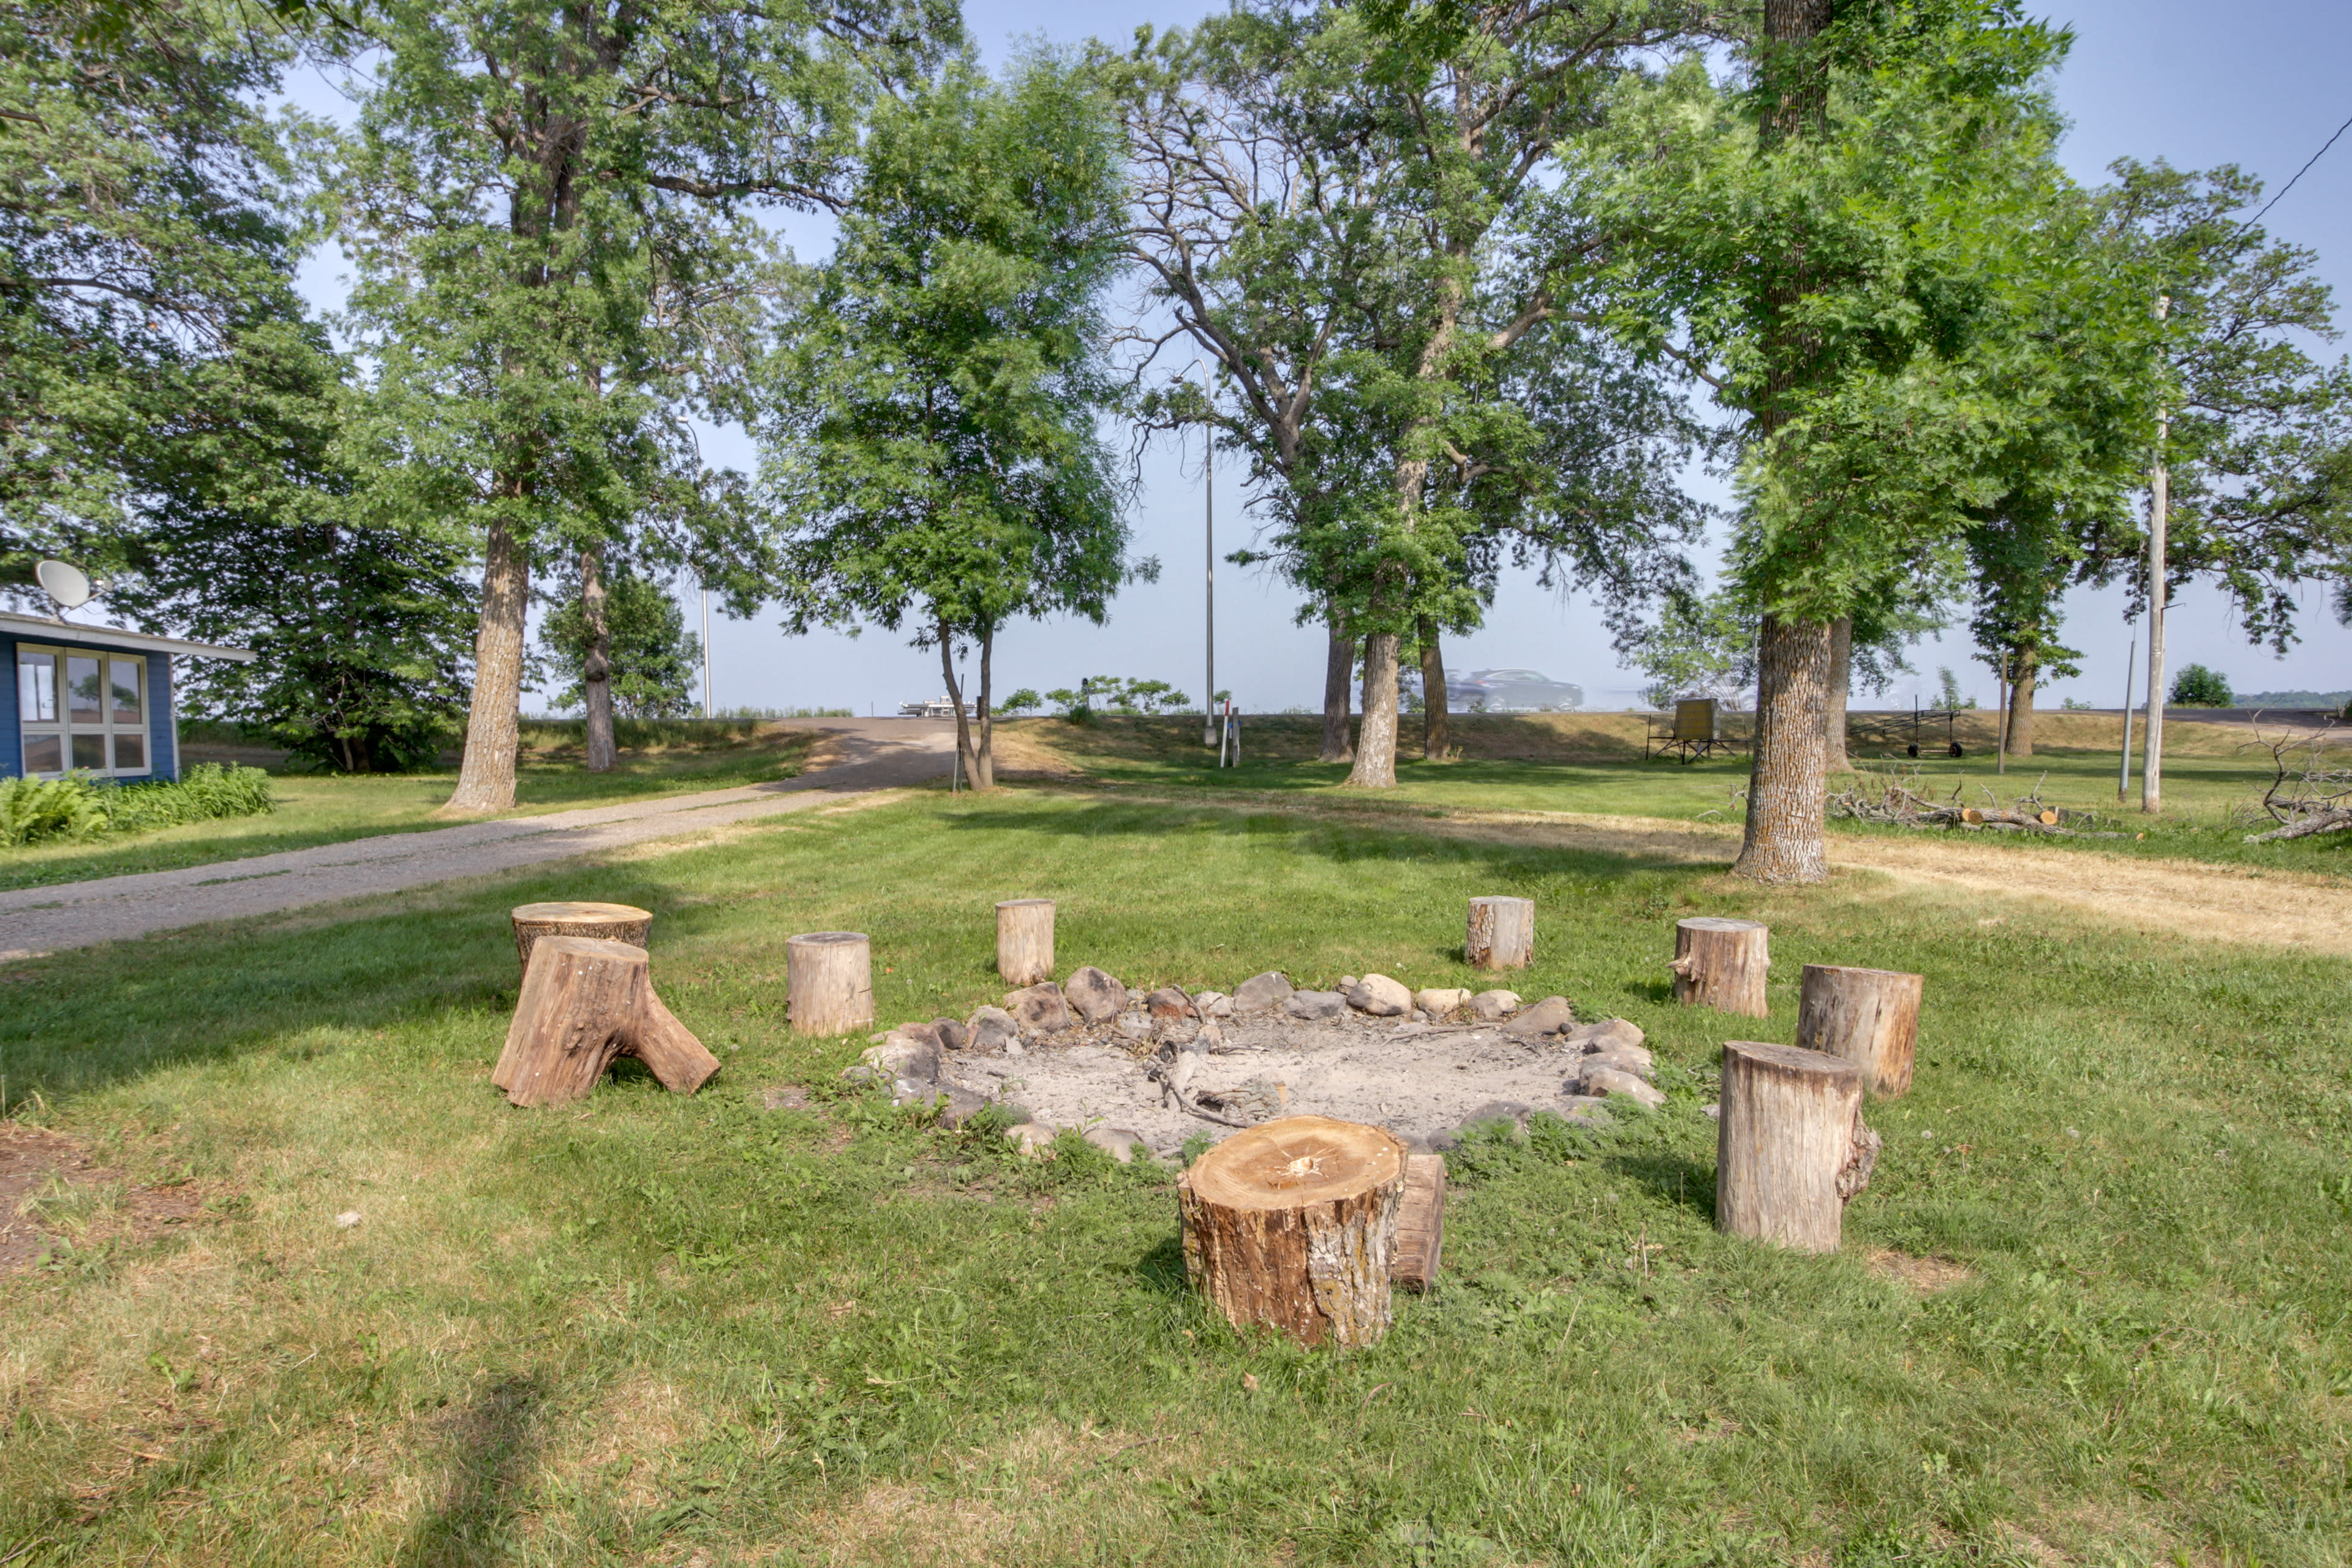 Wood-Burning Fire Pit | Wood Not Provided | Pets Welcome w/ Fee